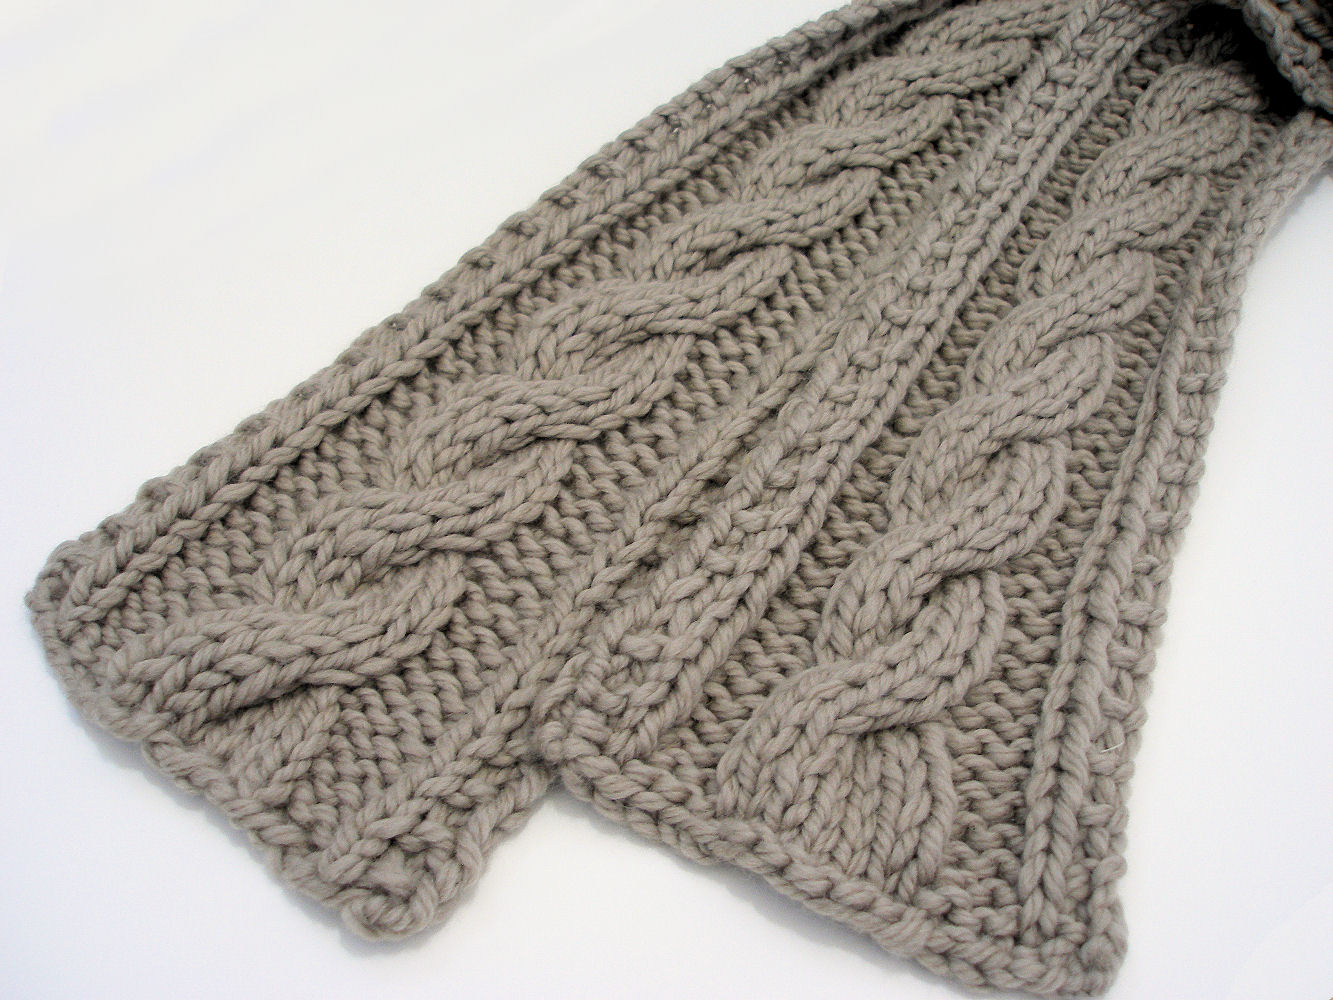 Knitted Cable Scarf Patterns 12 Best Photos Of Free Knitting Patterns Cable Scarves Free